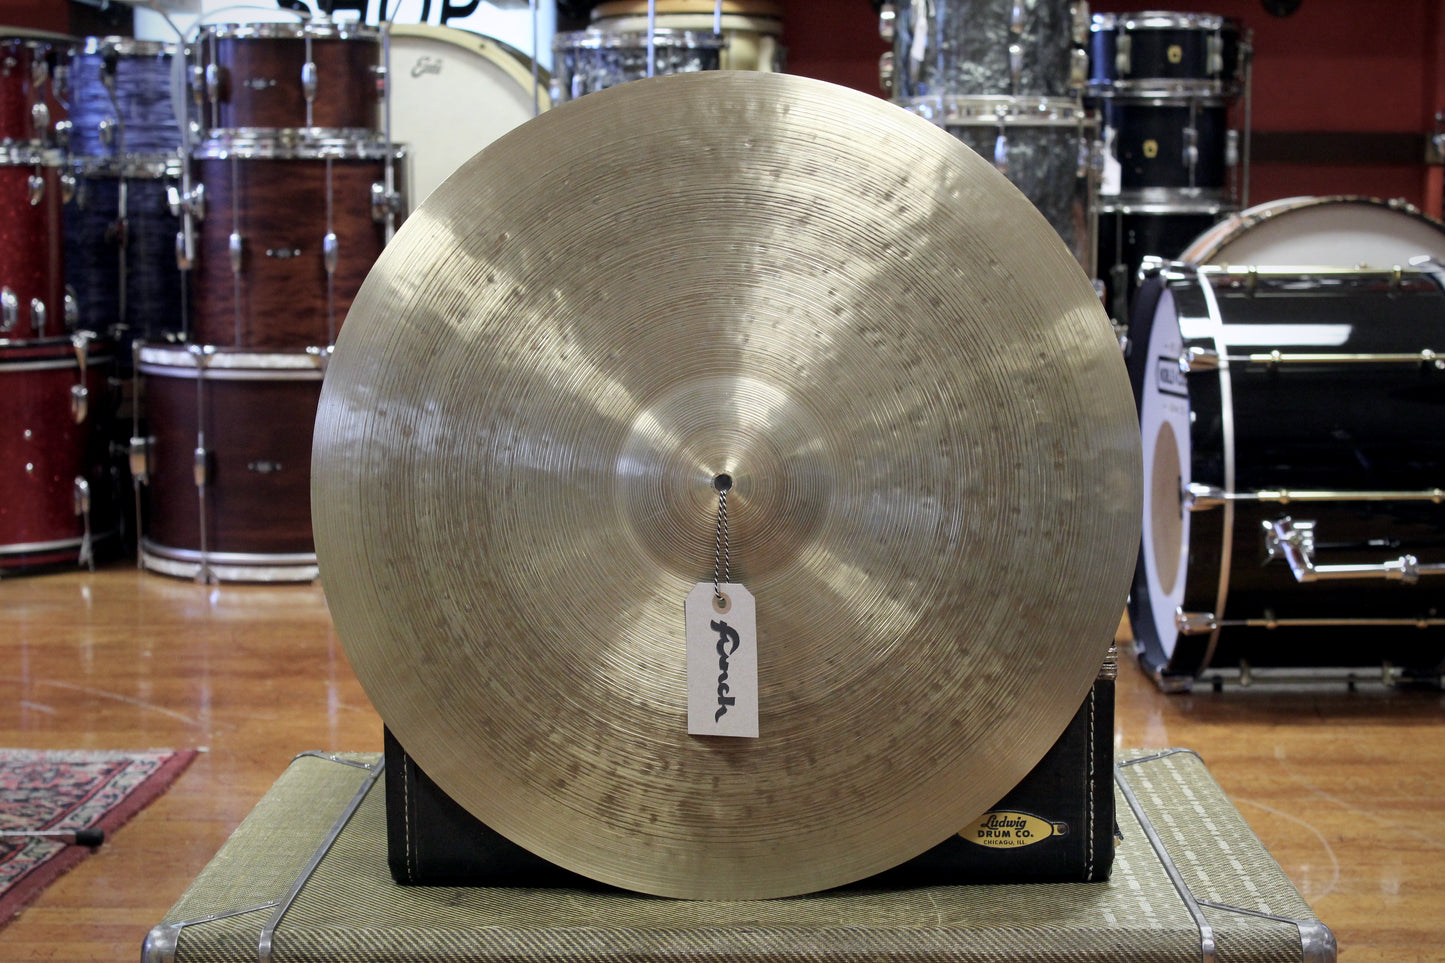 Funch Cymbals 22" Tony Williams Tribute Ride Cymbal 2535g